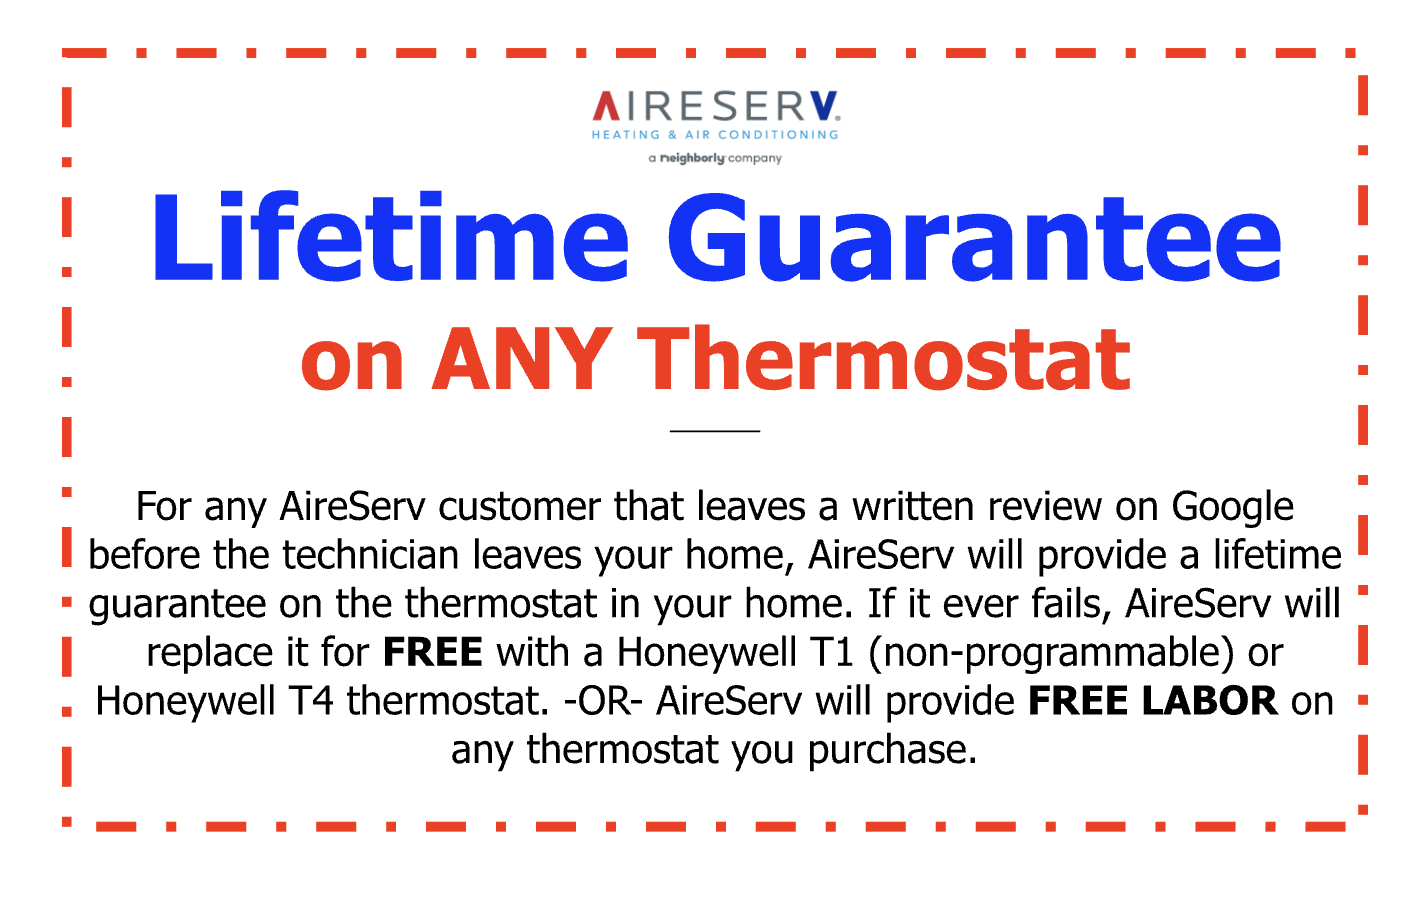 Lifetime Guarantee on Any Thermostat. Terms and conditions apply.